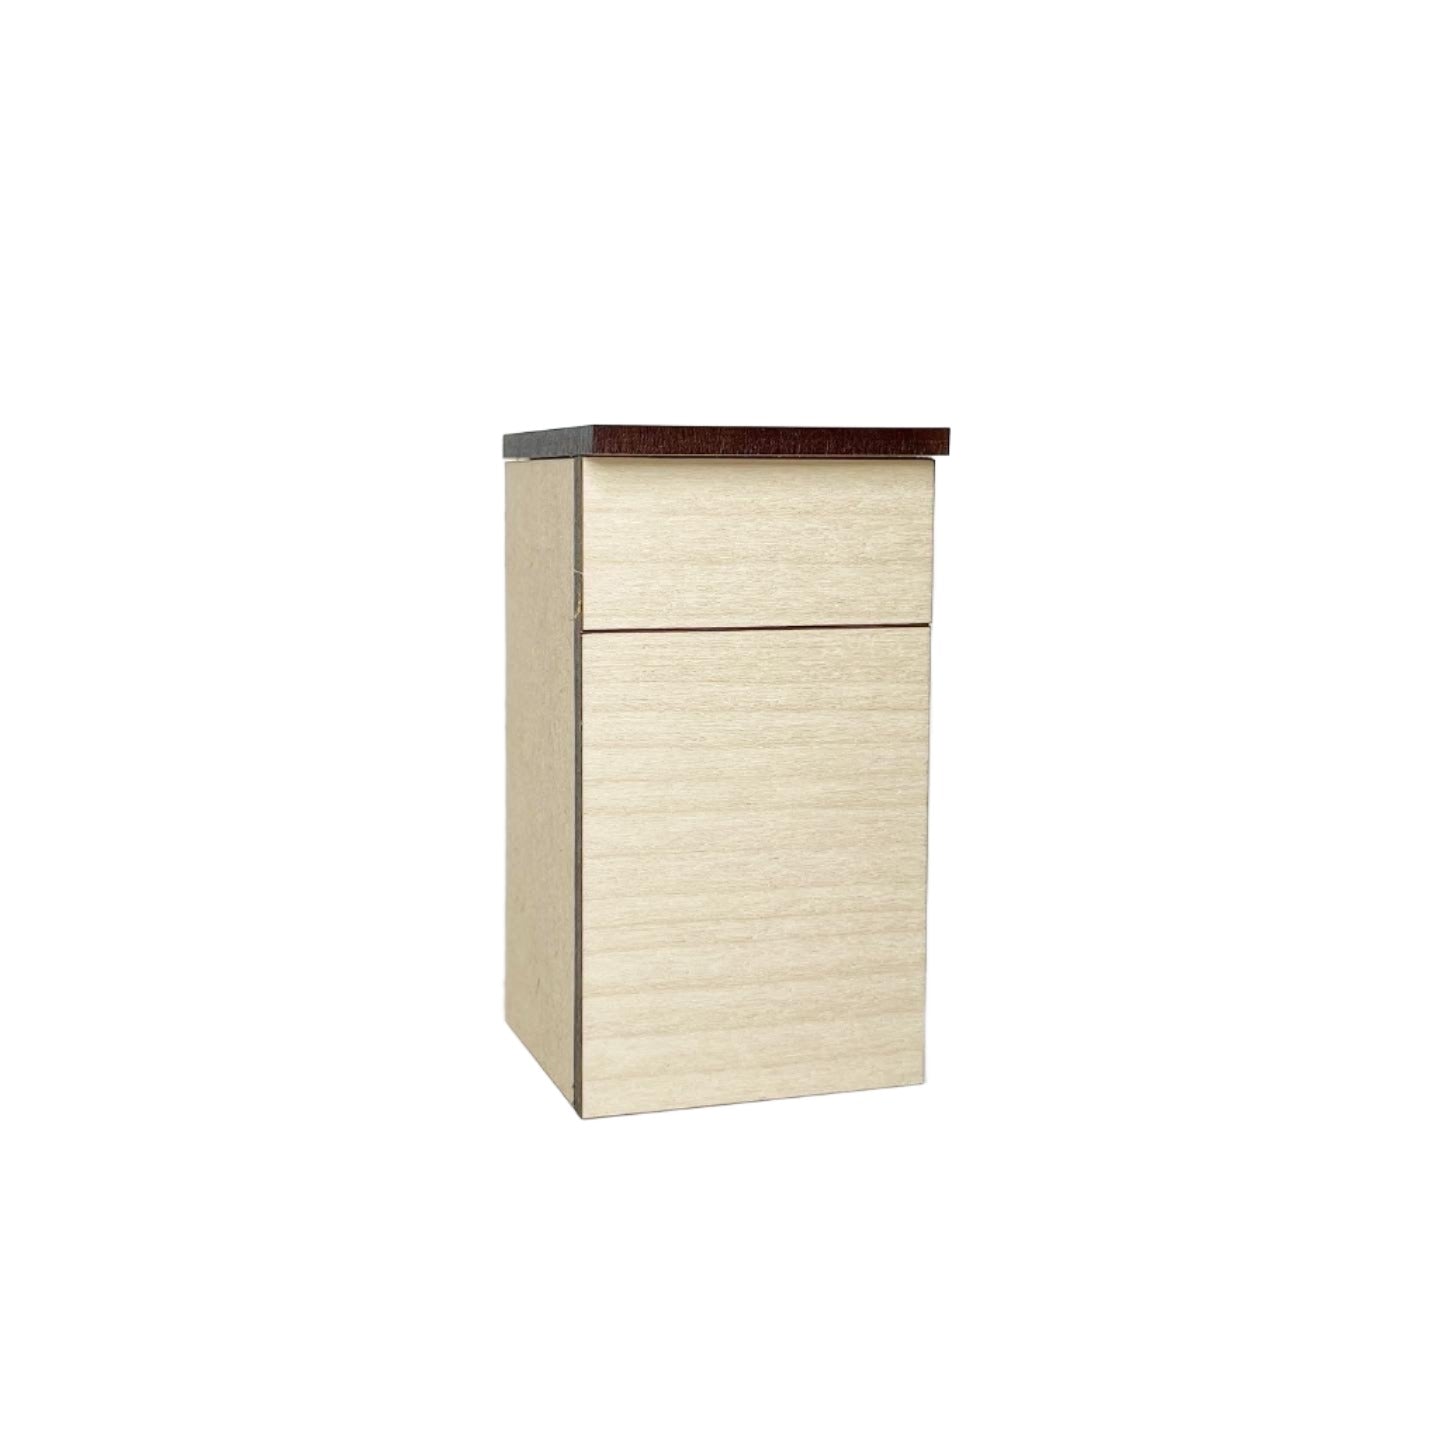 Single Lower Cabinet with Doors, Modern